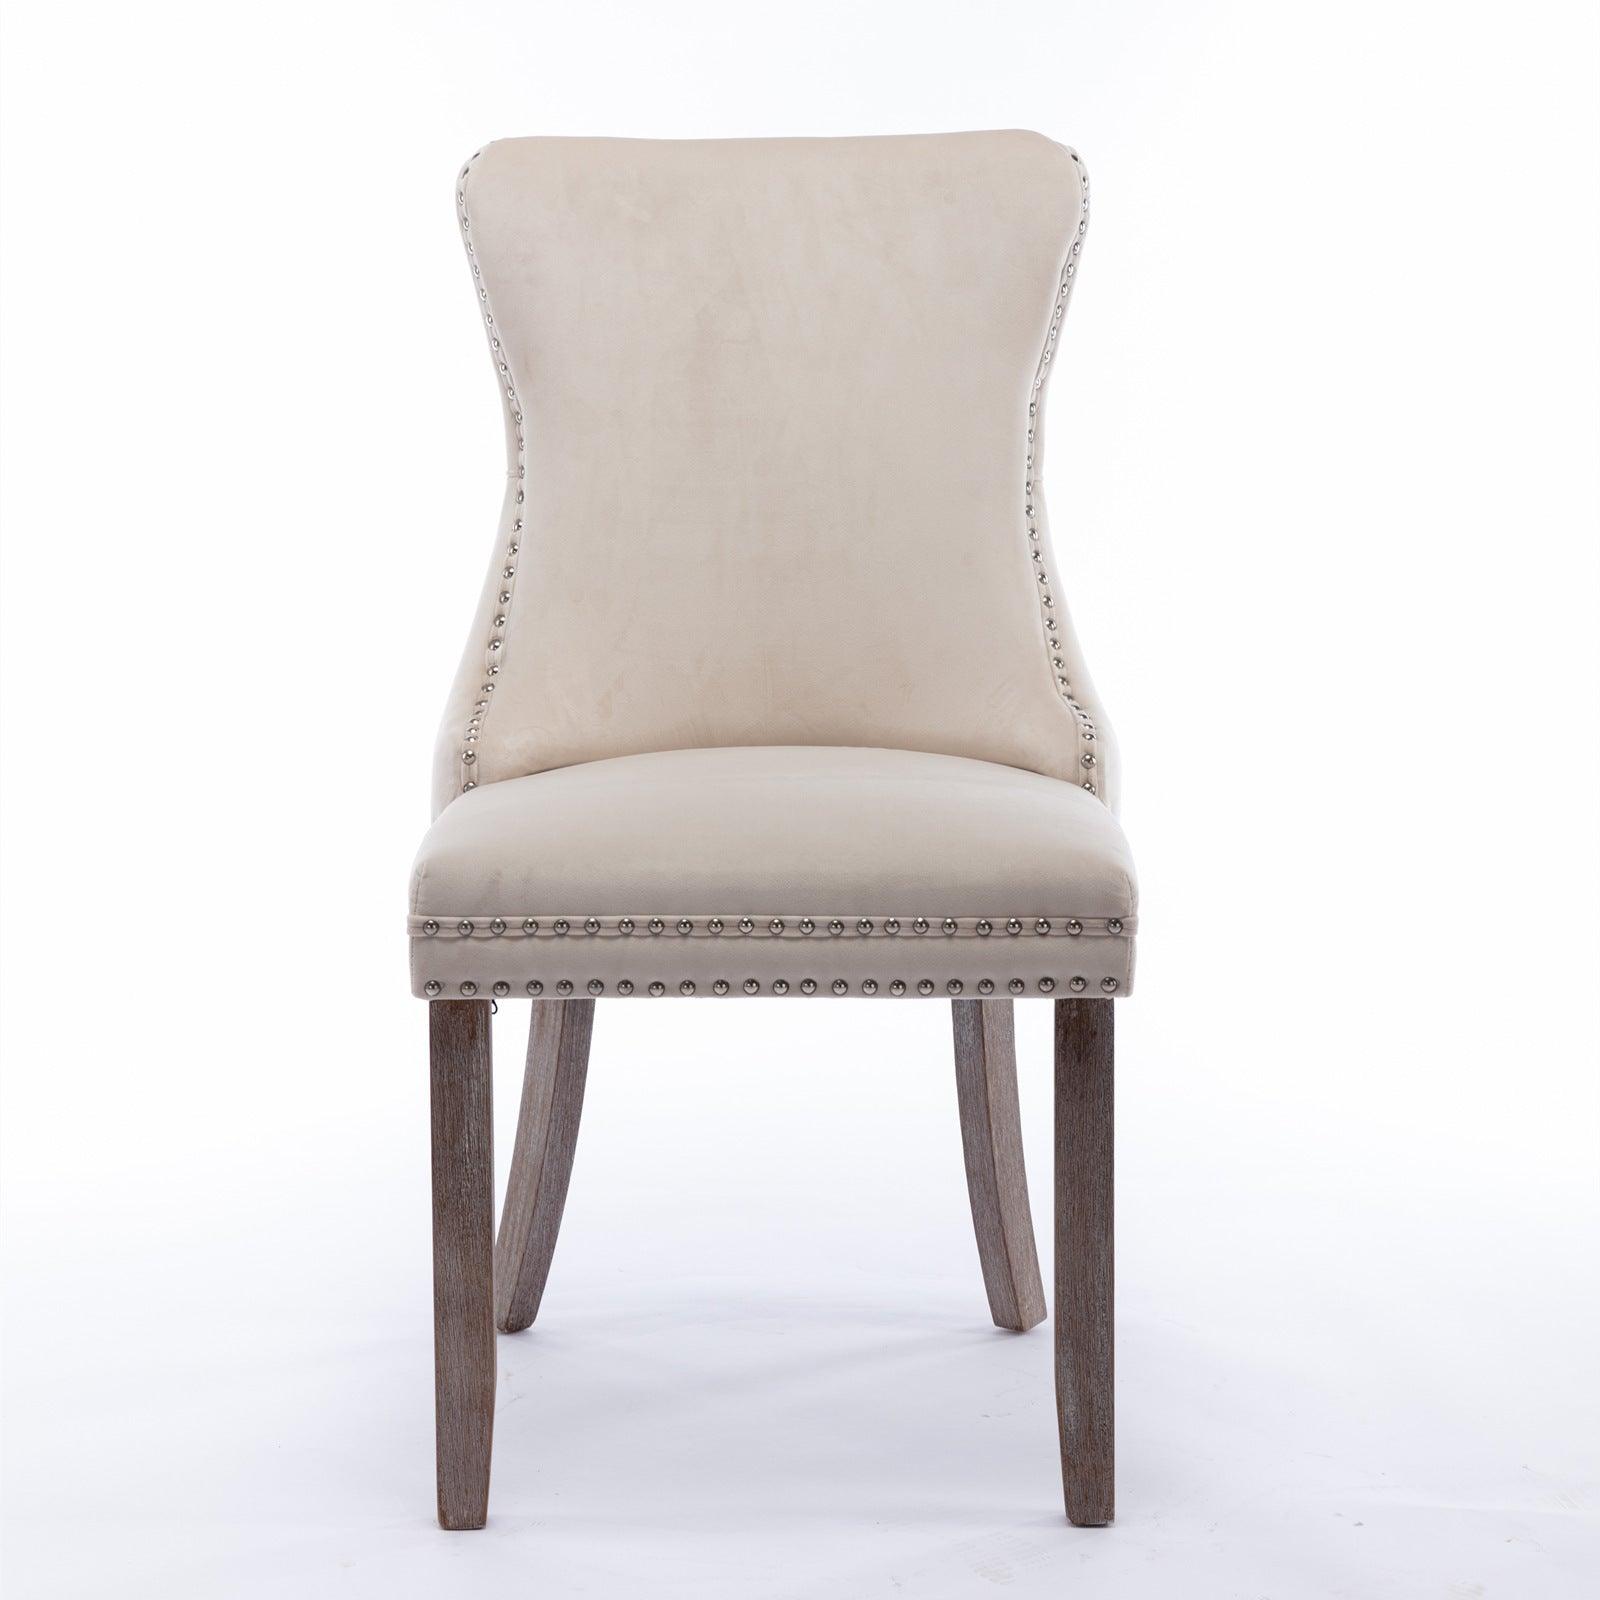 🆓🚛 Upholstered Wing-Back Dining Chair With Backstitching Nailhead Trim & Solid Wood Legs, Set Of 2, Beige